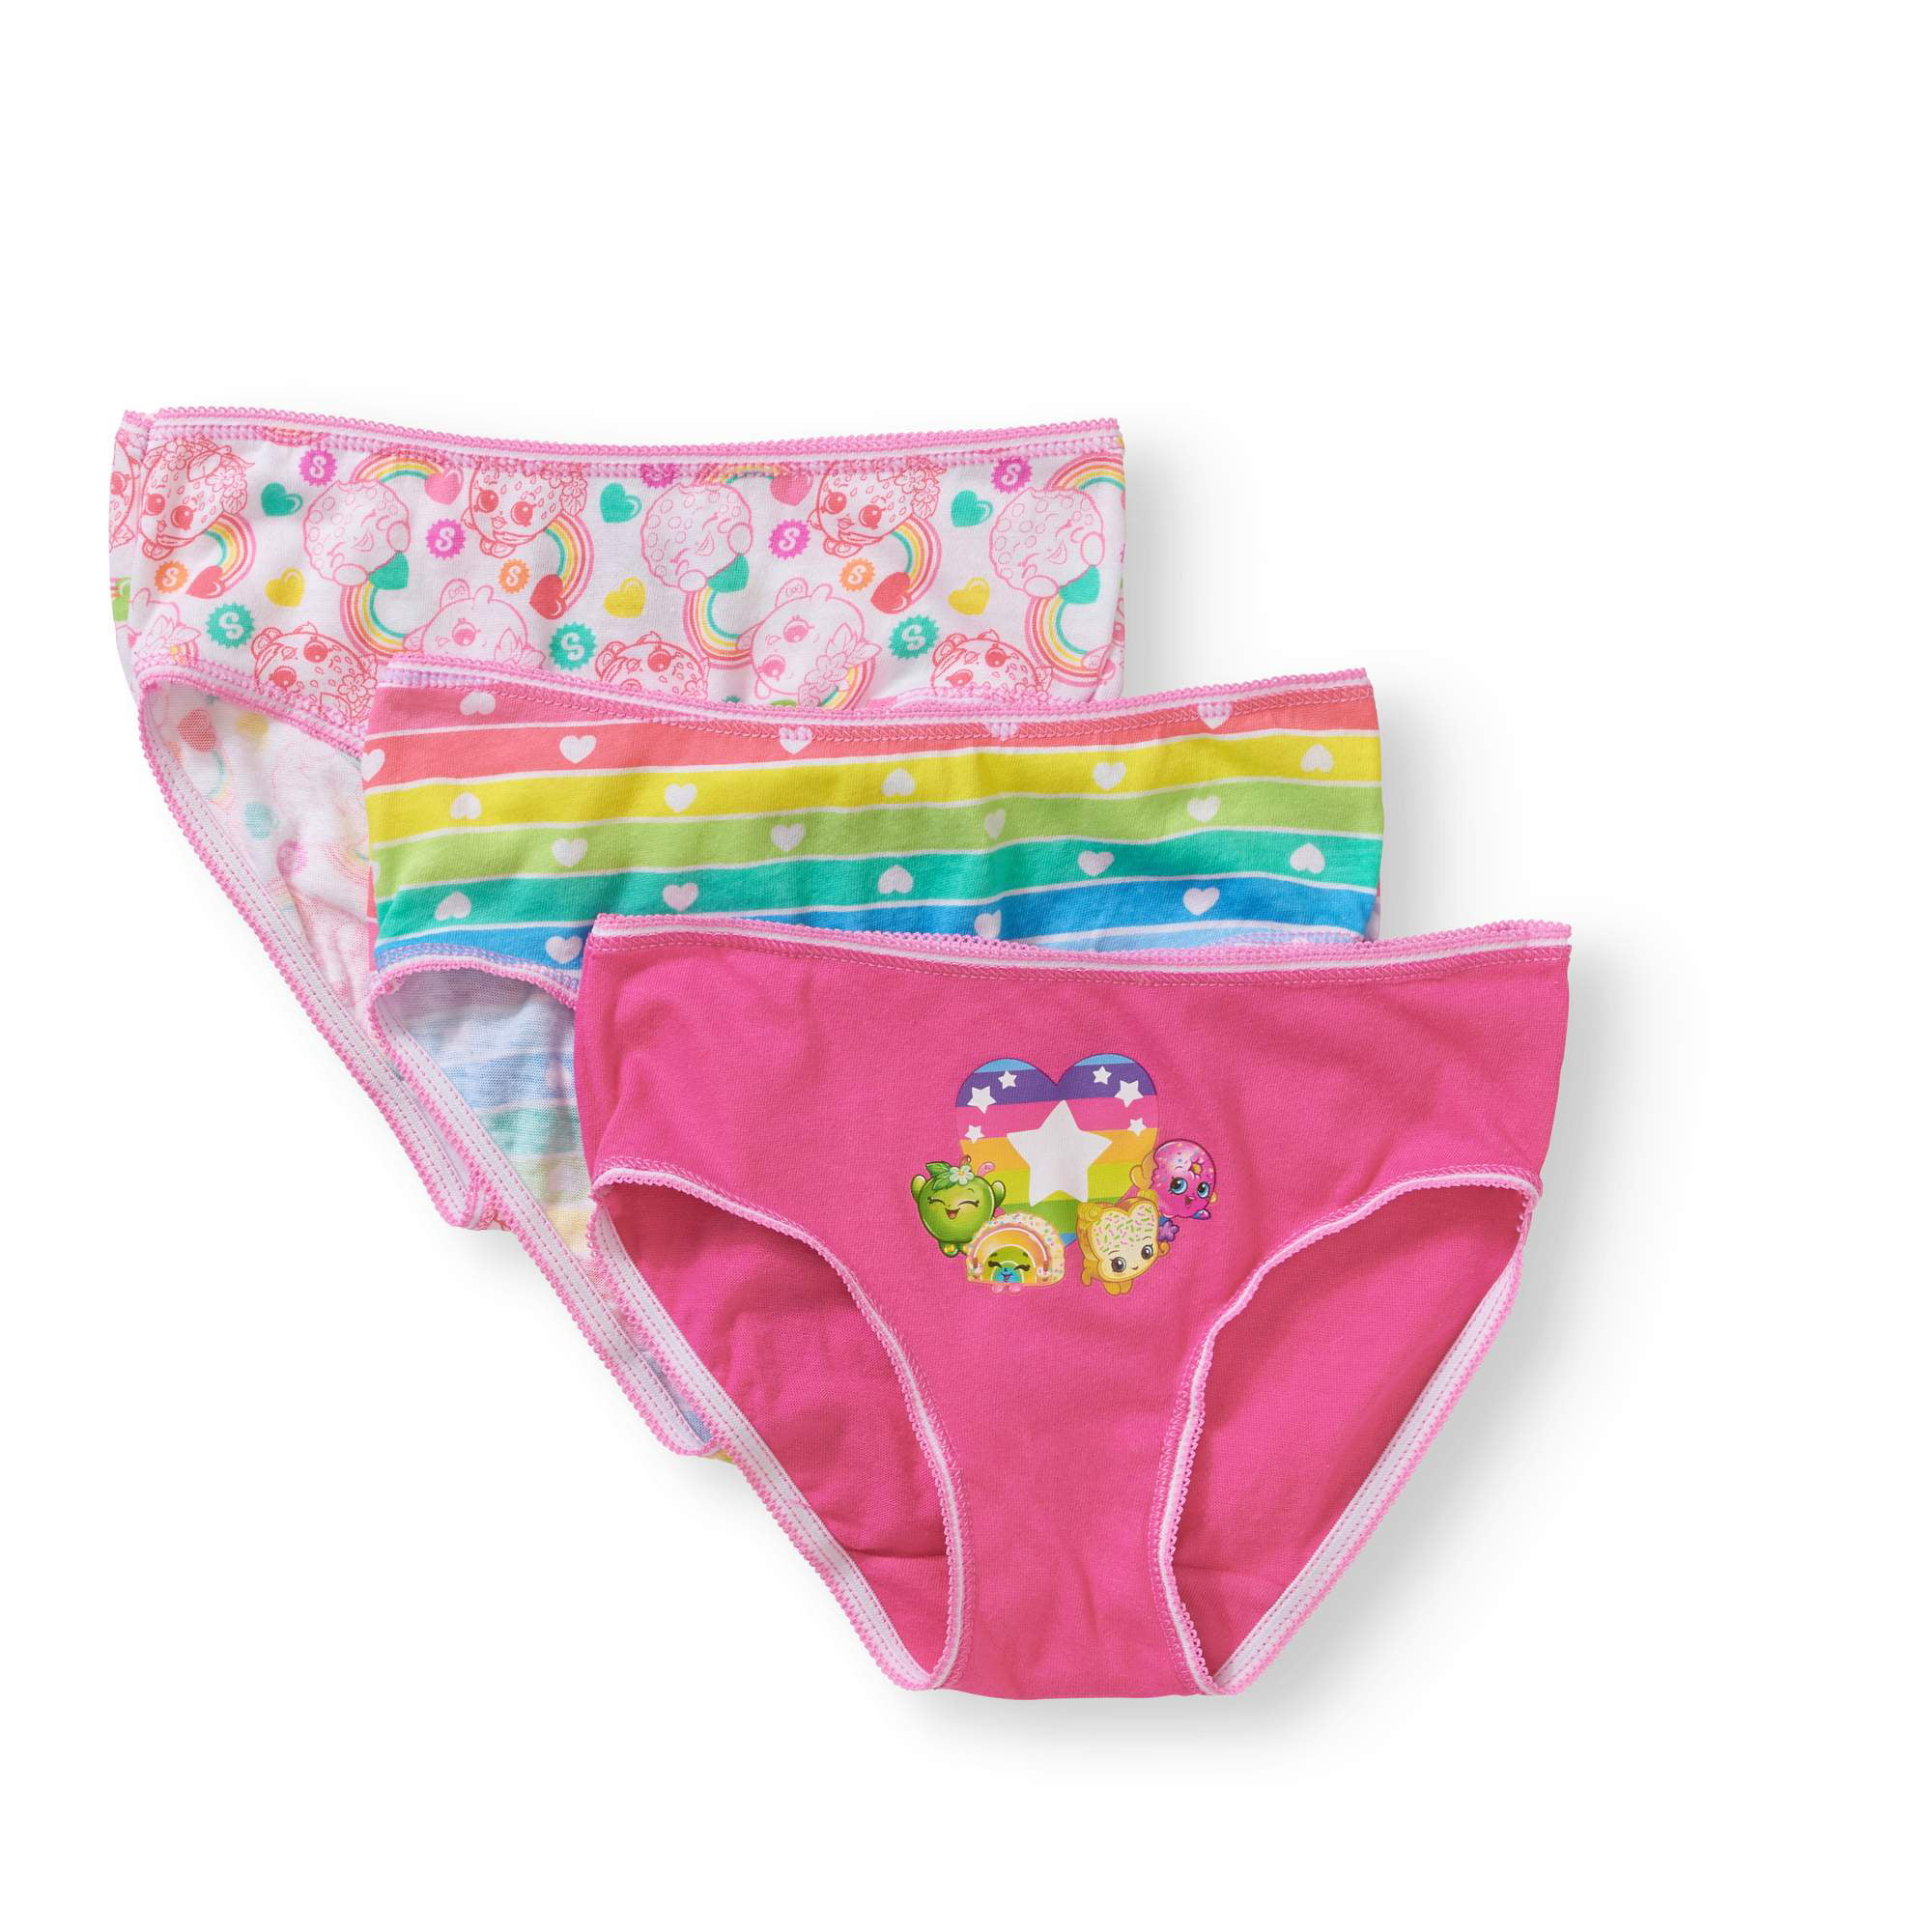 Cartoon Character Products Shopkins 3 Pack Girls Pants/Knickers 